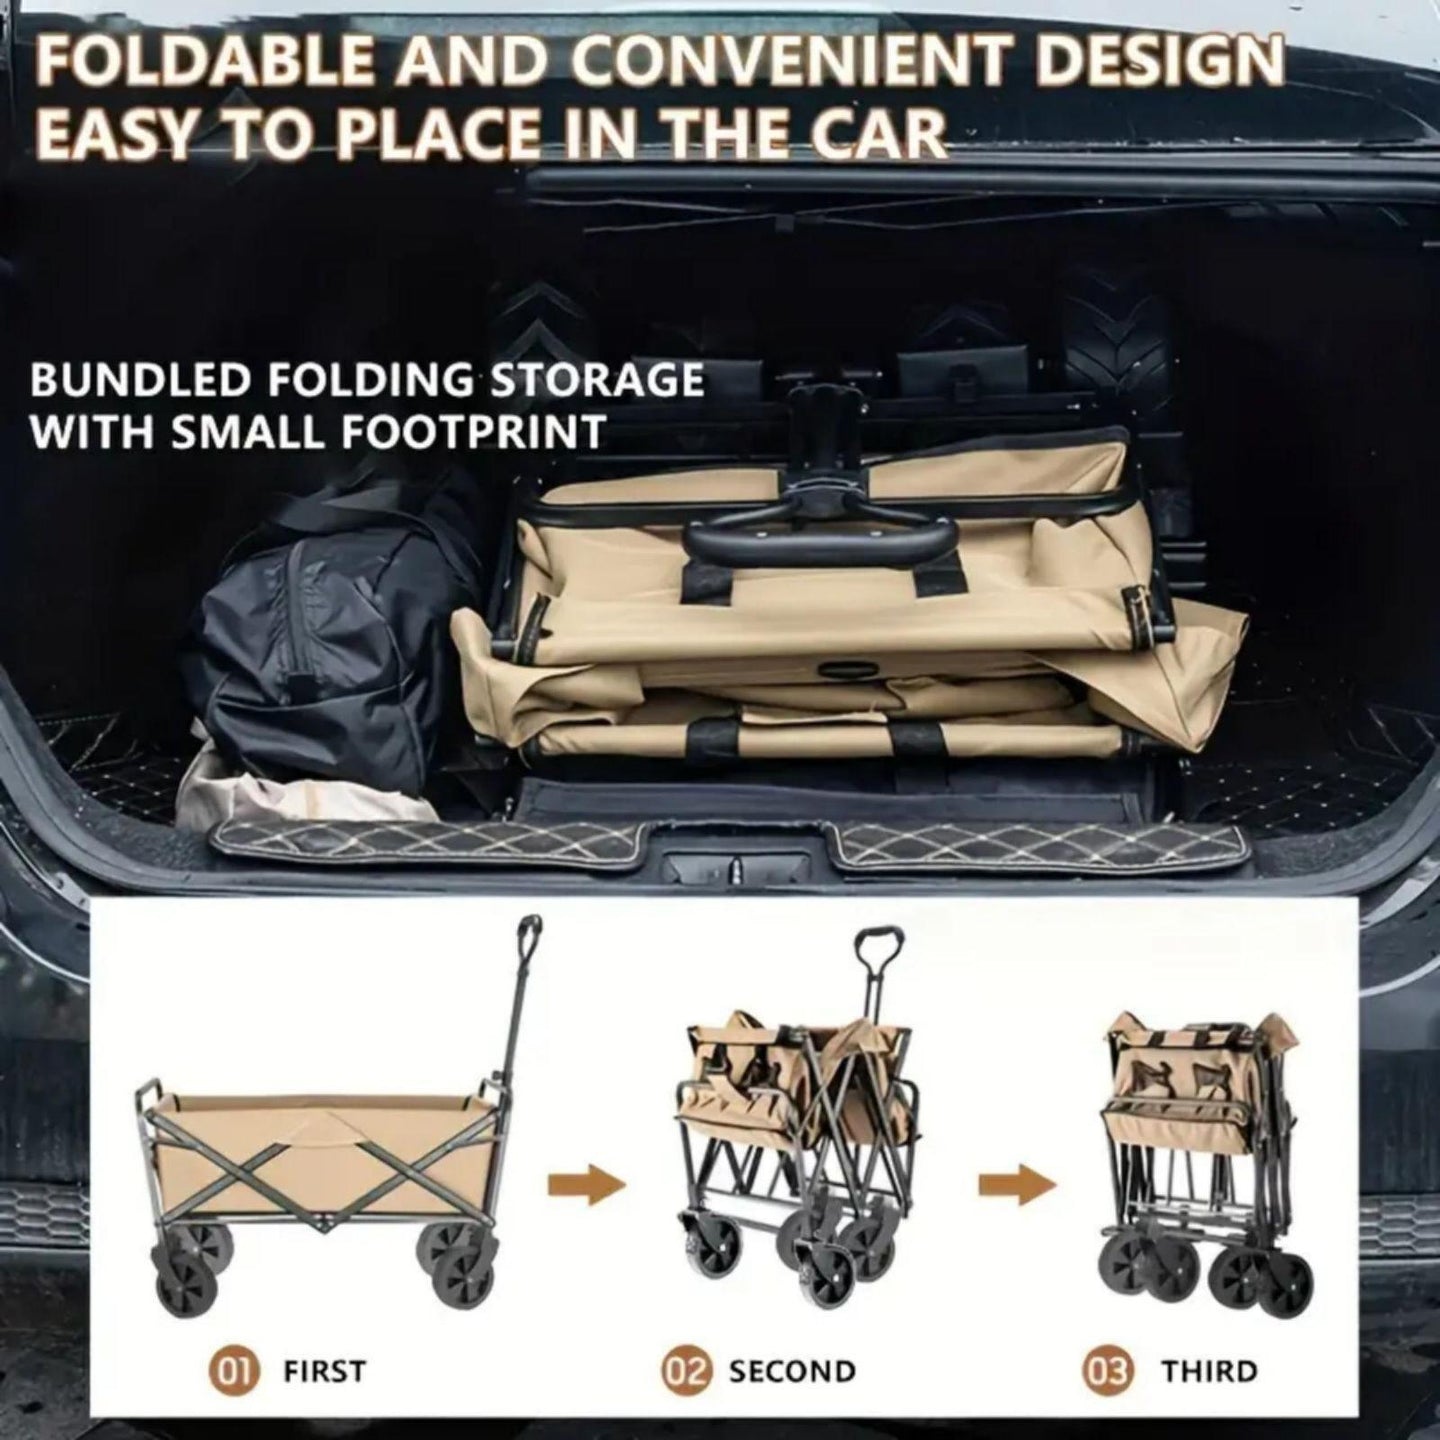 Buy 1PC Foldable Shopping Cart ( Khaki ), Heavy Duty Collapsible Wagon with All-Terrain 10cm Wheels, Load 150kg, Portable 160 Liter Large Capacity Beach Wagon, Camping, Garden, Beach Day, Picnics, Shopping, Outdoor Grocery Cart with Adjustable Handle discounted | Products On Sale Australia